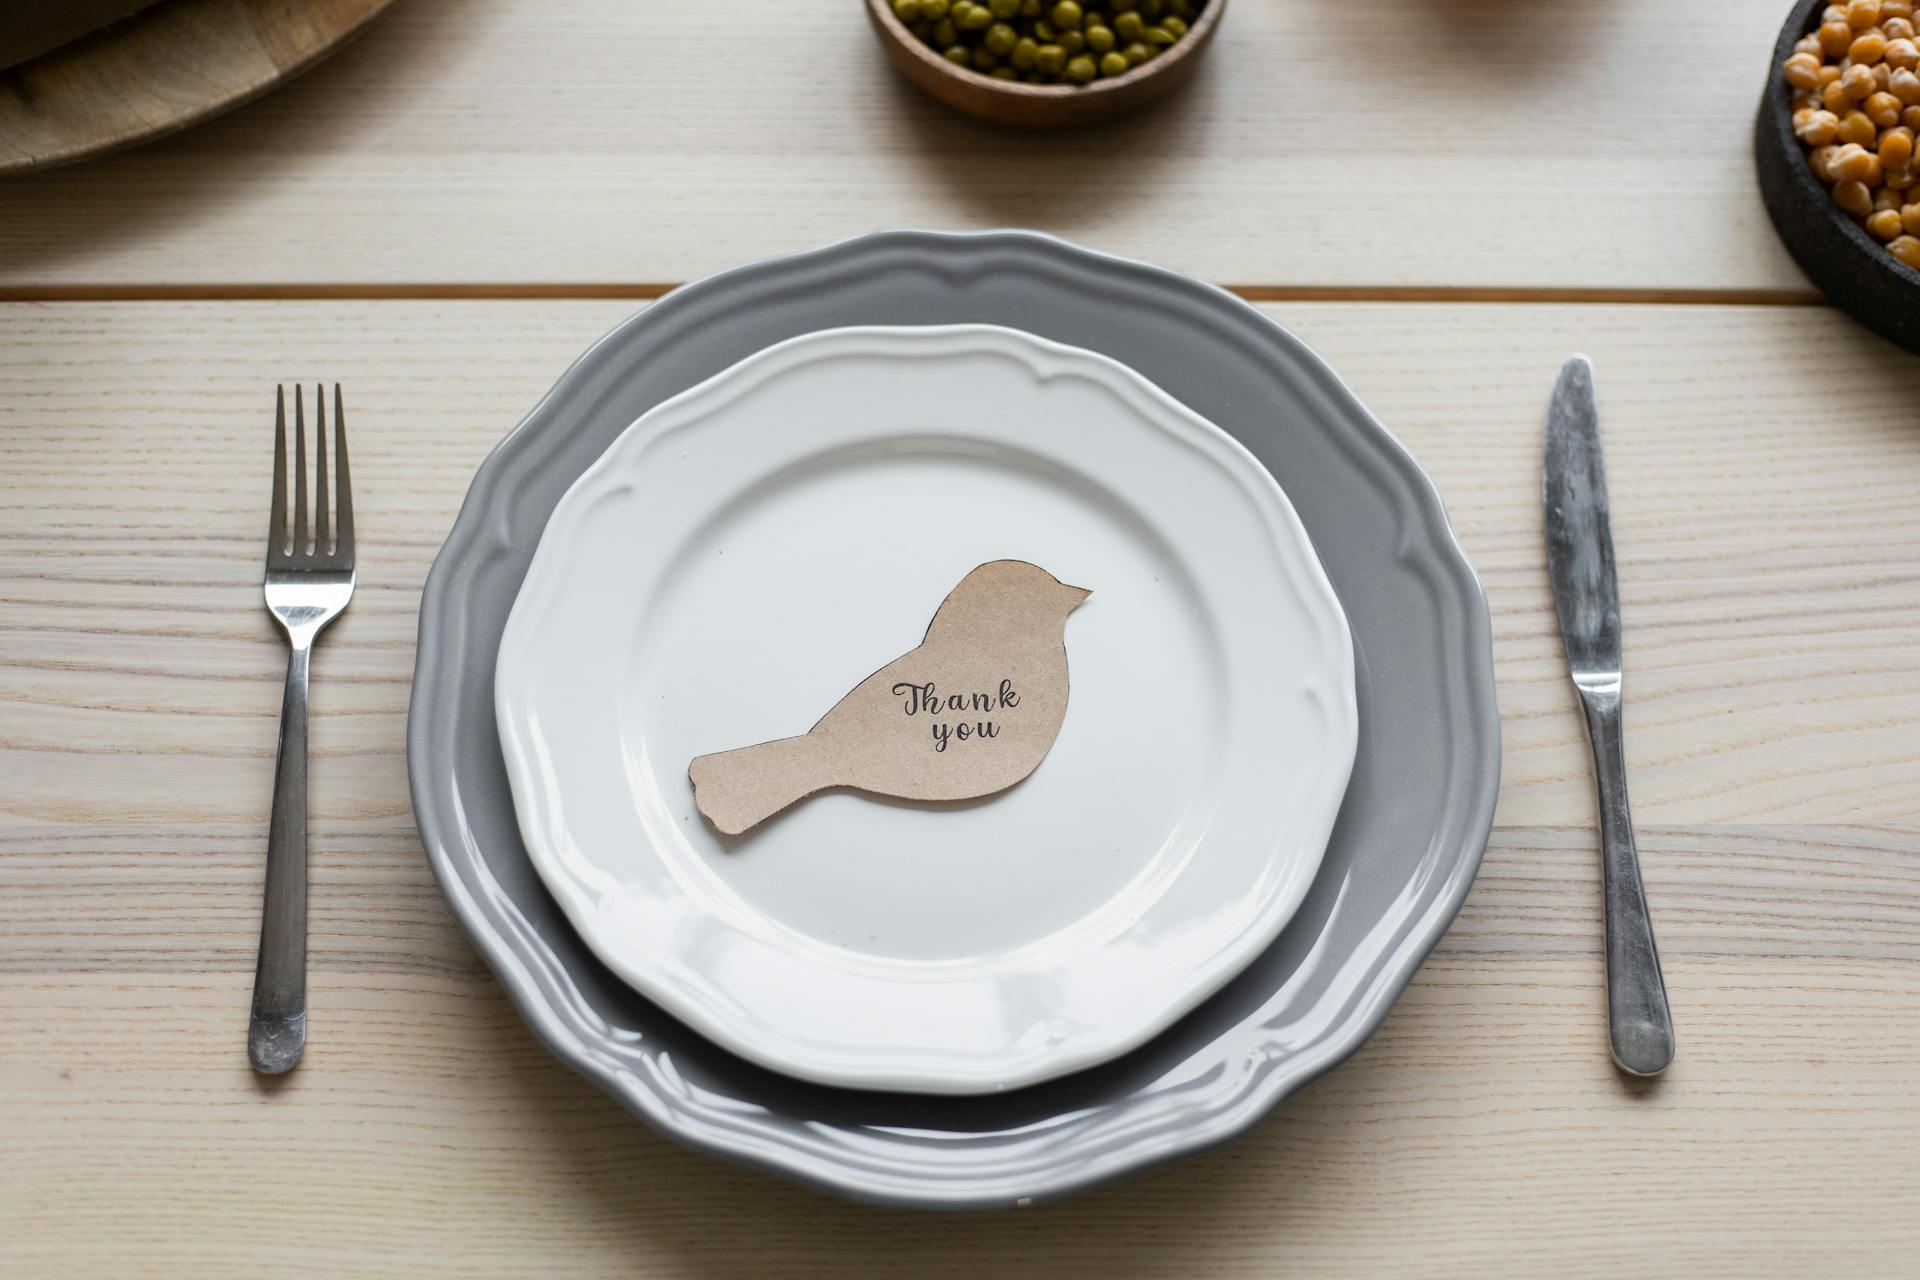 Top view of carton postcard cutout in shape of bird with printed Thank You inscription placed on plate on Thanksgiving dinner